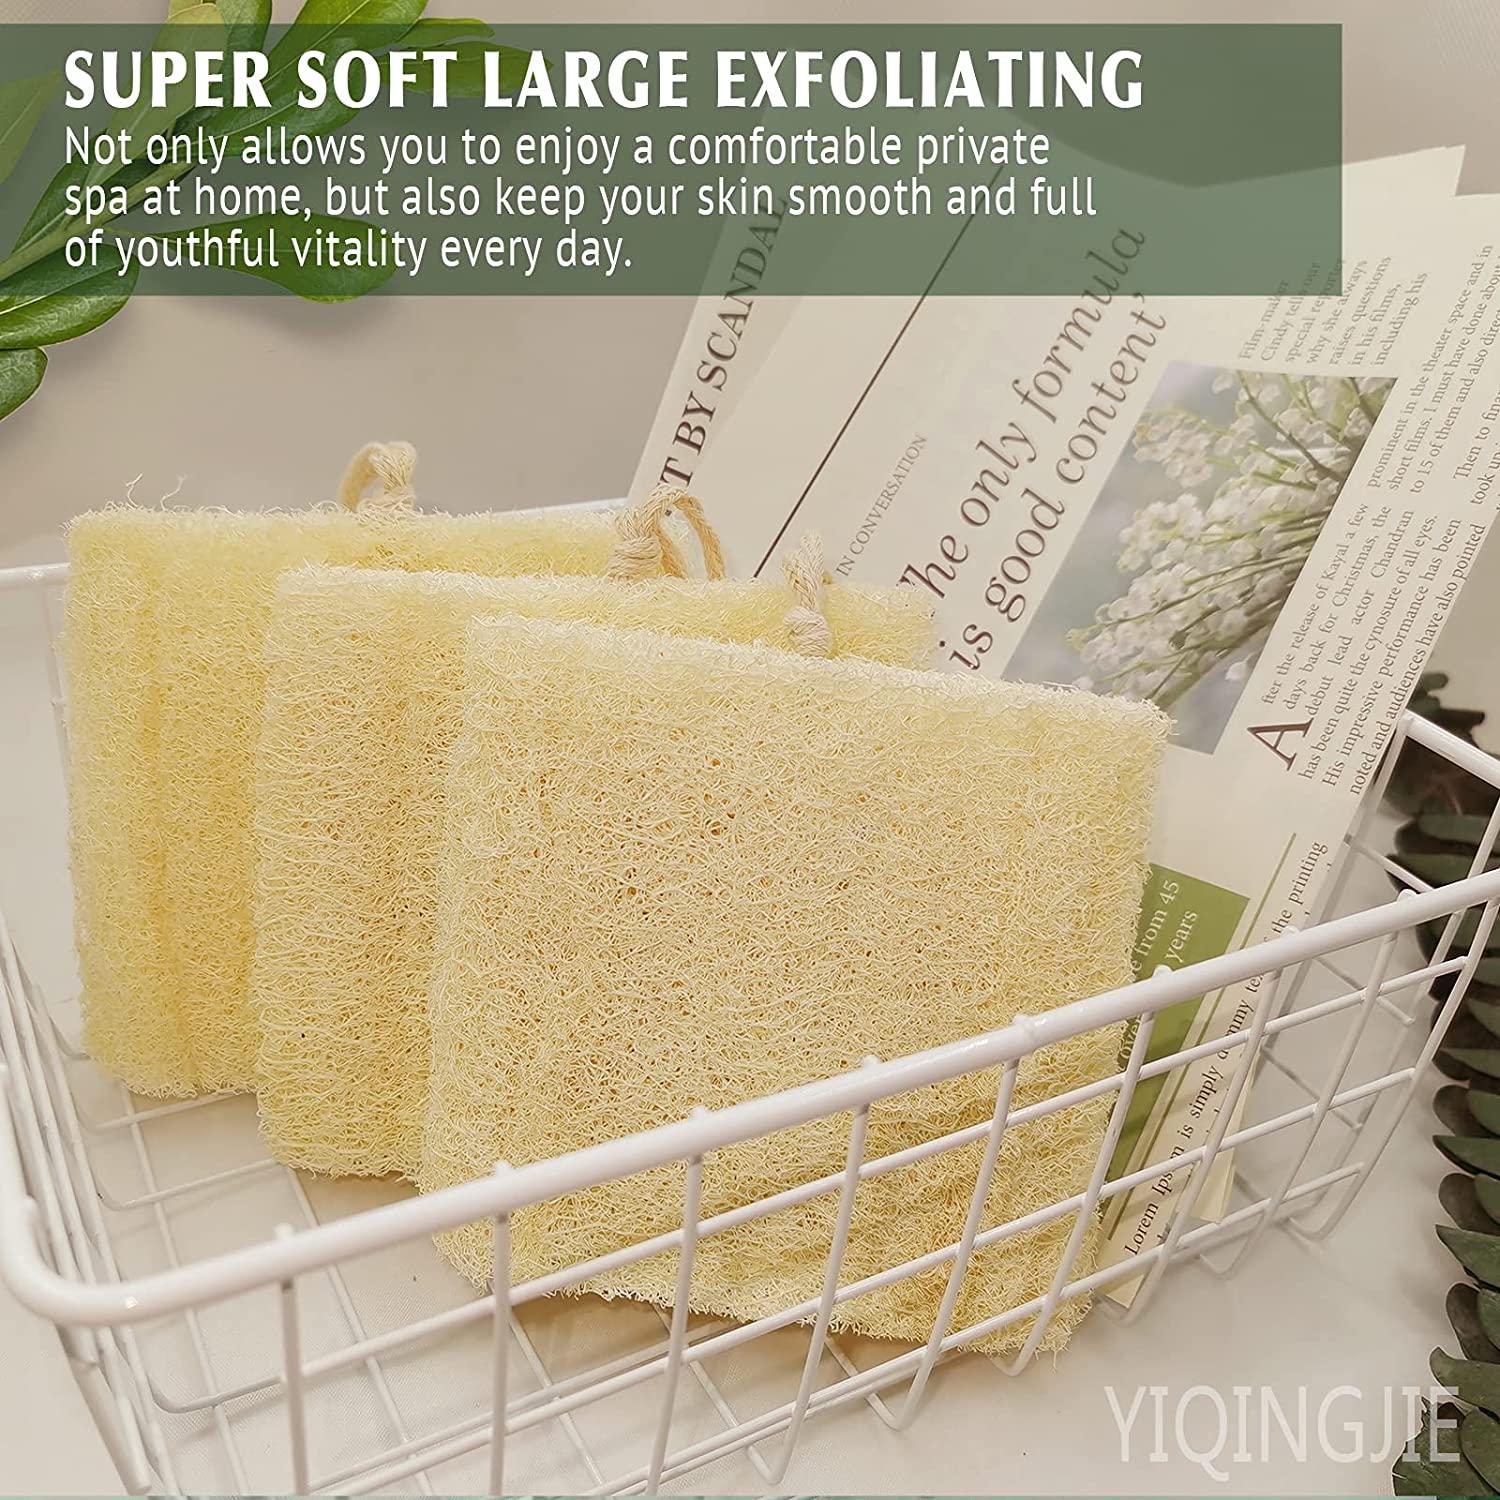 Loofah Sponge (2 Pack) Bath Accessories | 30 + Washes Bath Sponge with  Travel Soap Container | Natural Soap Sponges are Great Christmas Gifts |  Travel